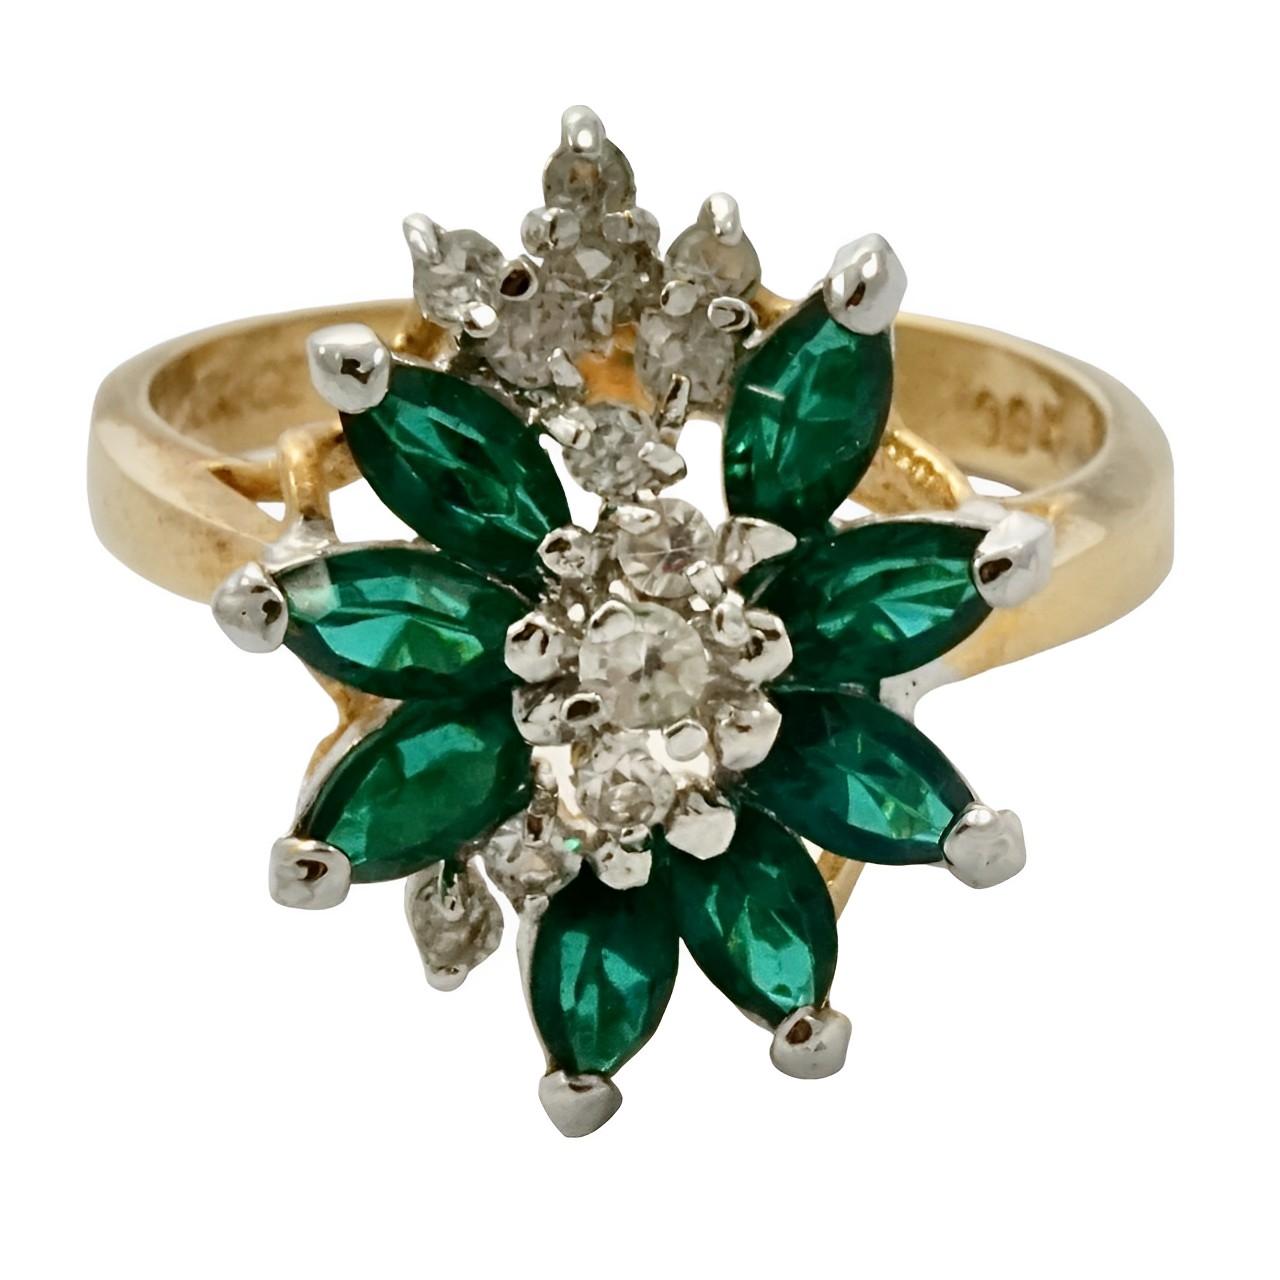 Beautiful 18K gold plated ring, set with marquise shape faux emeralds and round faux diamonds. Ring size UK Q / US 8, inside diameter 1.9 cm / .74 inch. Measuring 2 cm / .78 inch by 1.5 cm / .59 inch.

This lovely ring exudes timeless glamour.